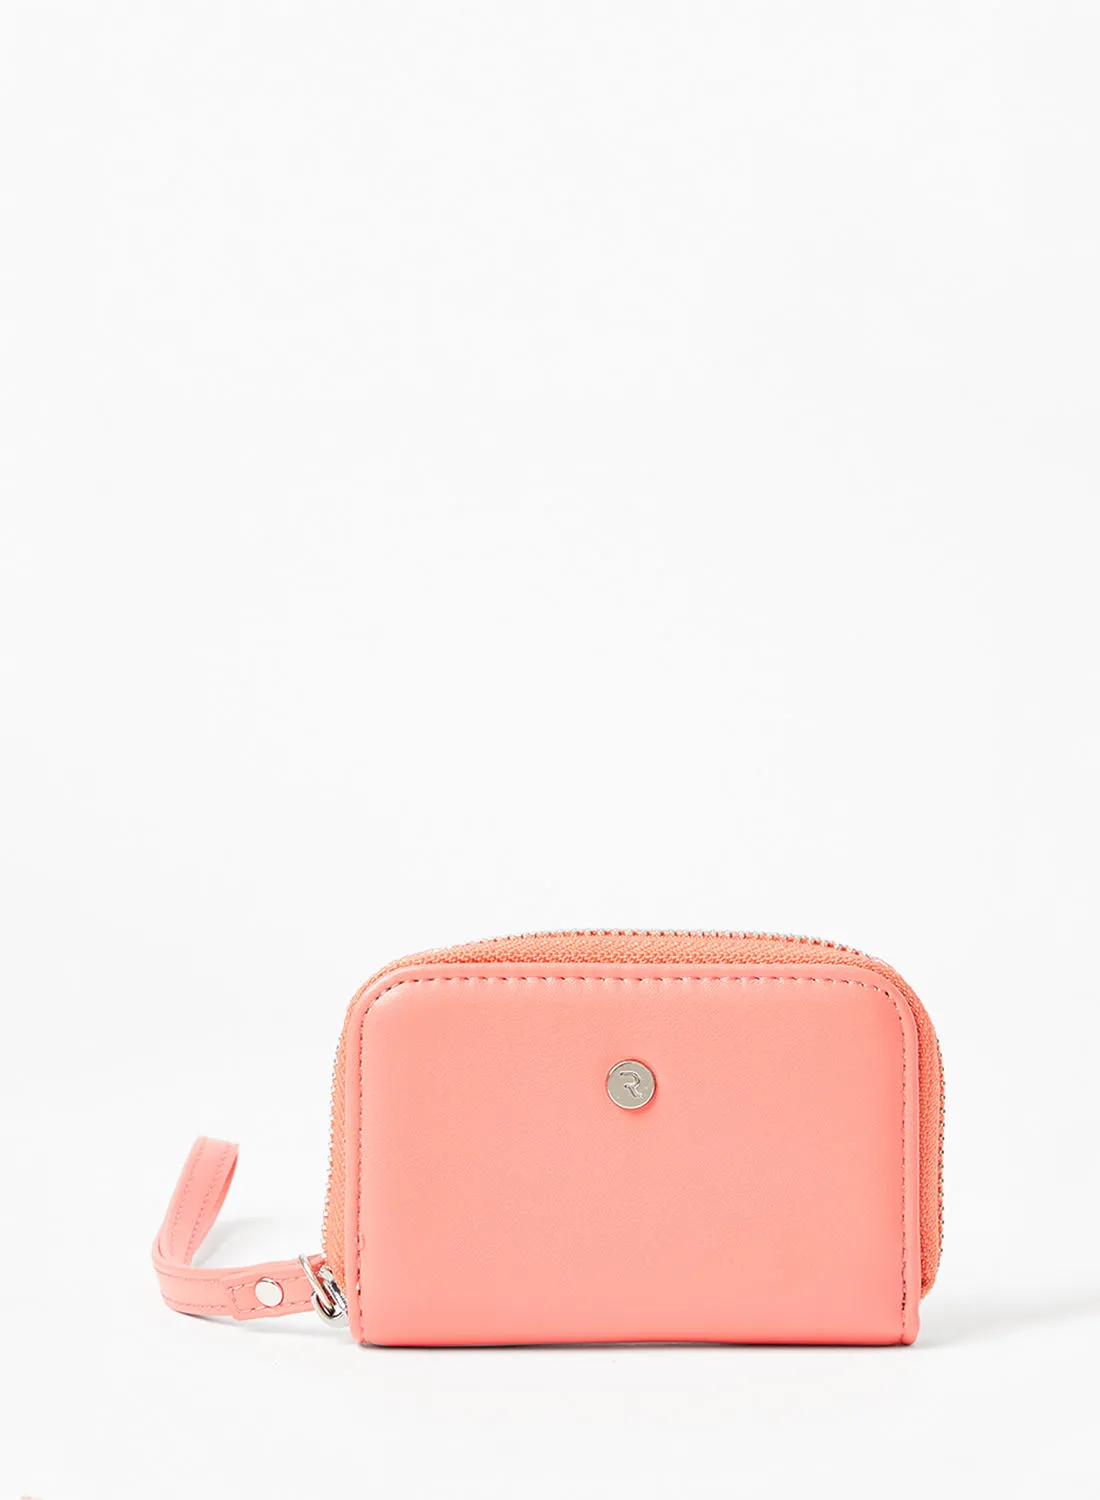 Reserved Faux Leather Wallet Pink